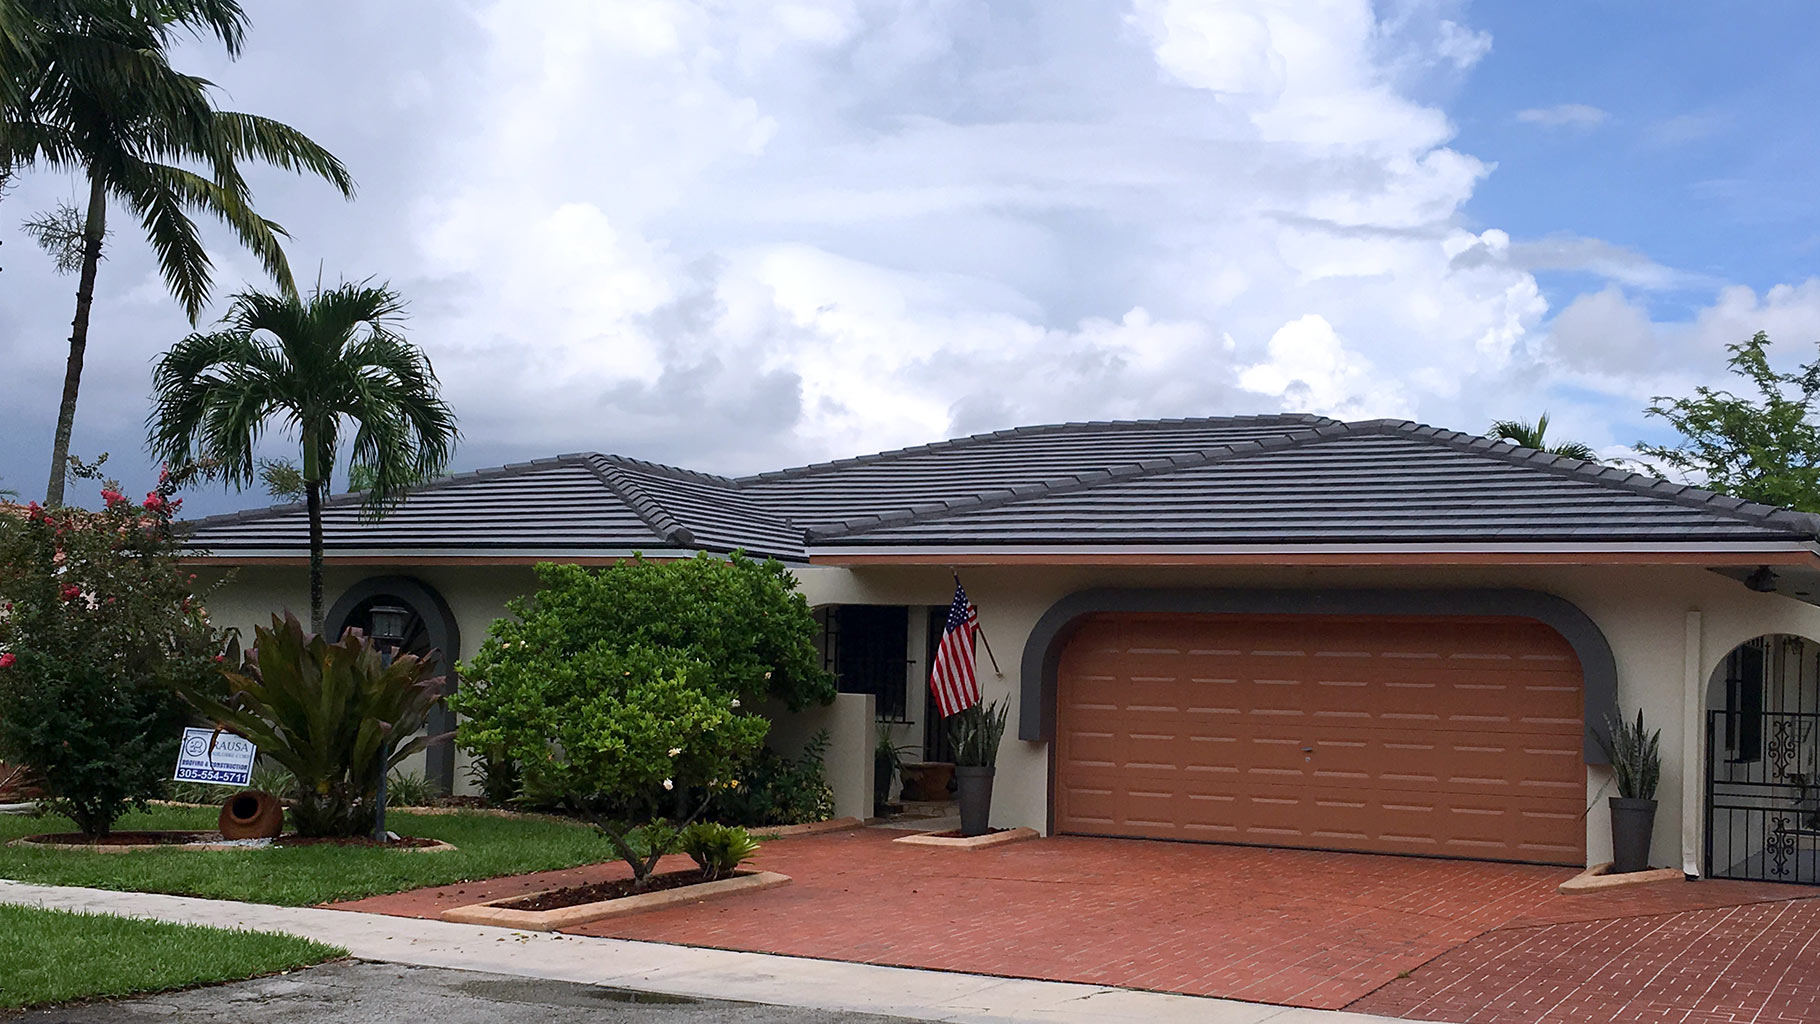 Installed flat concrete roof tile